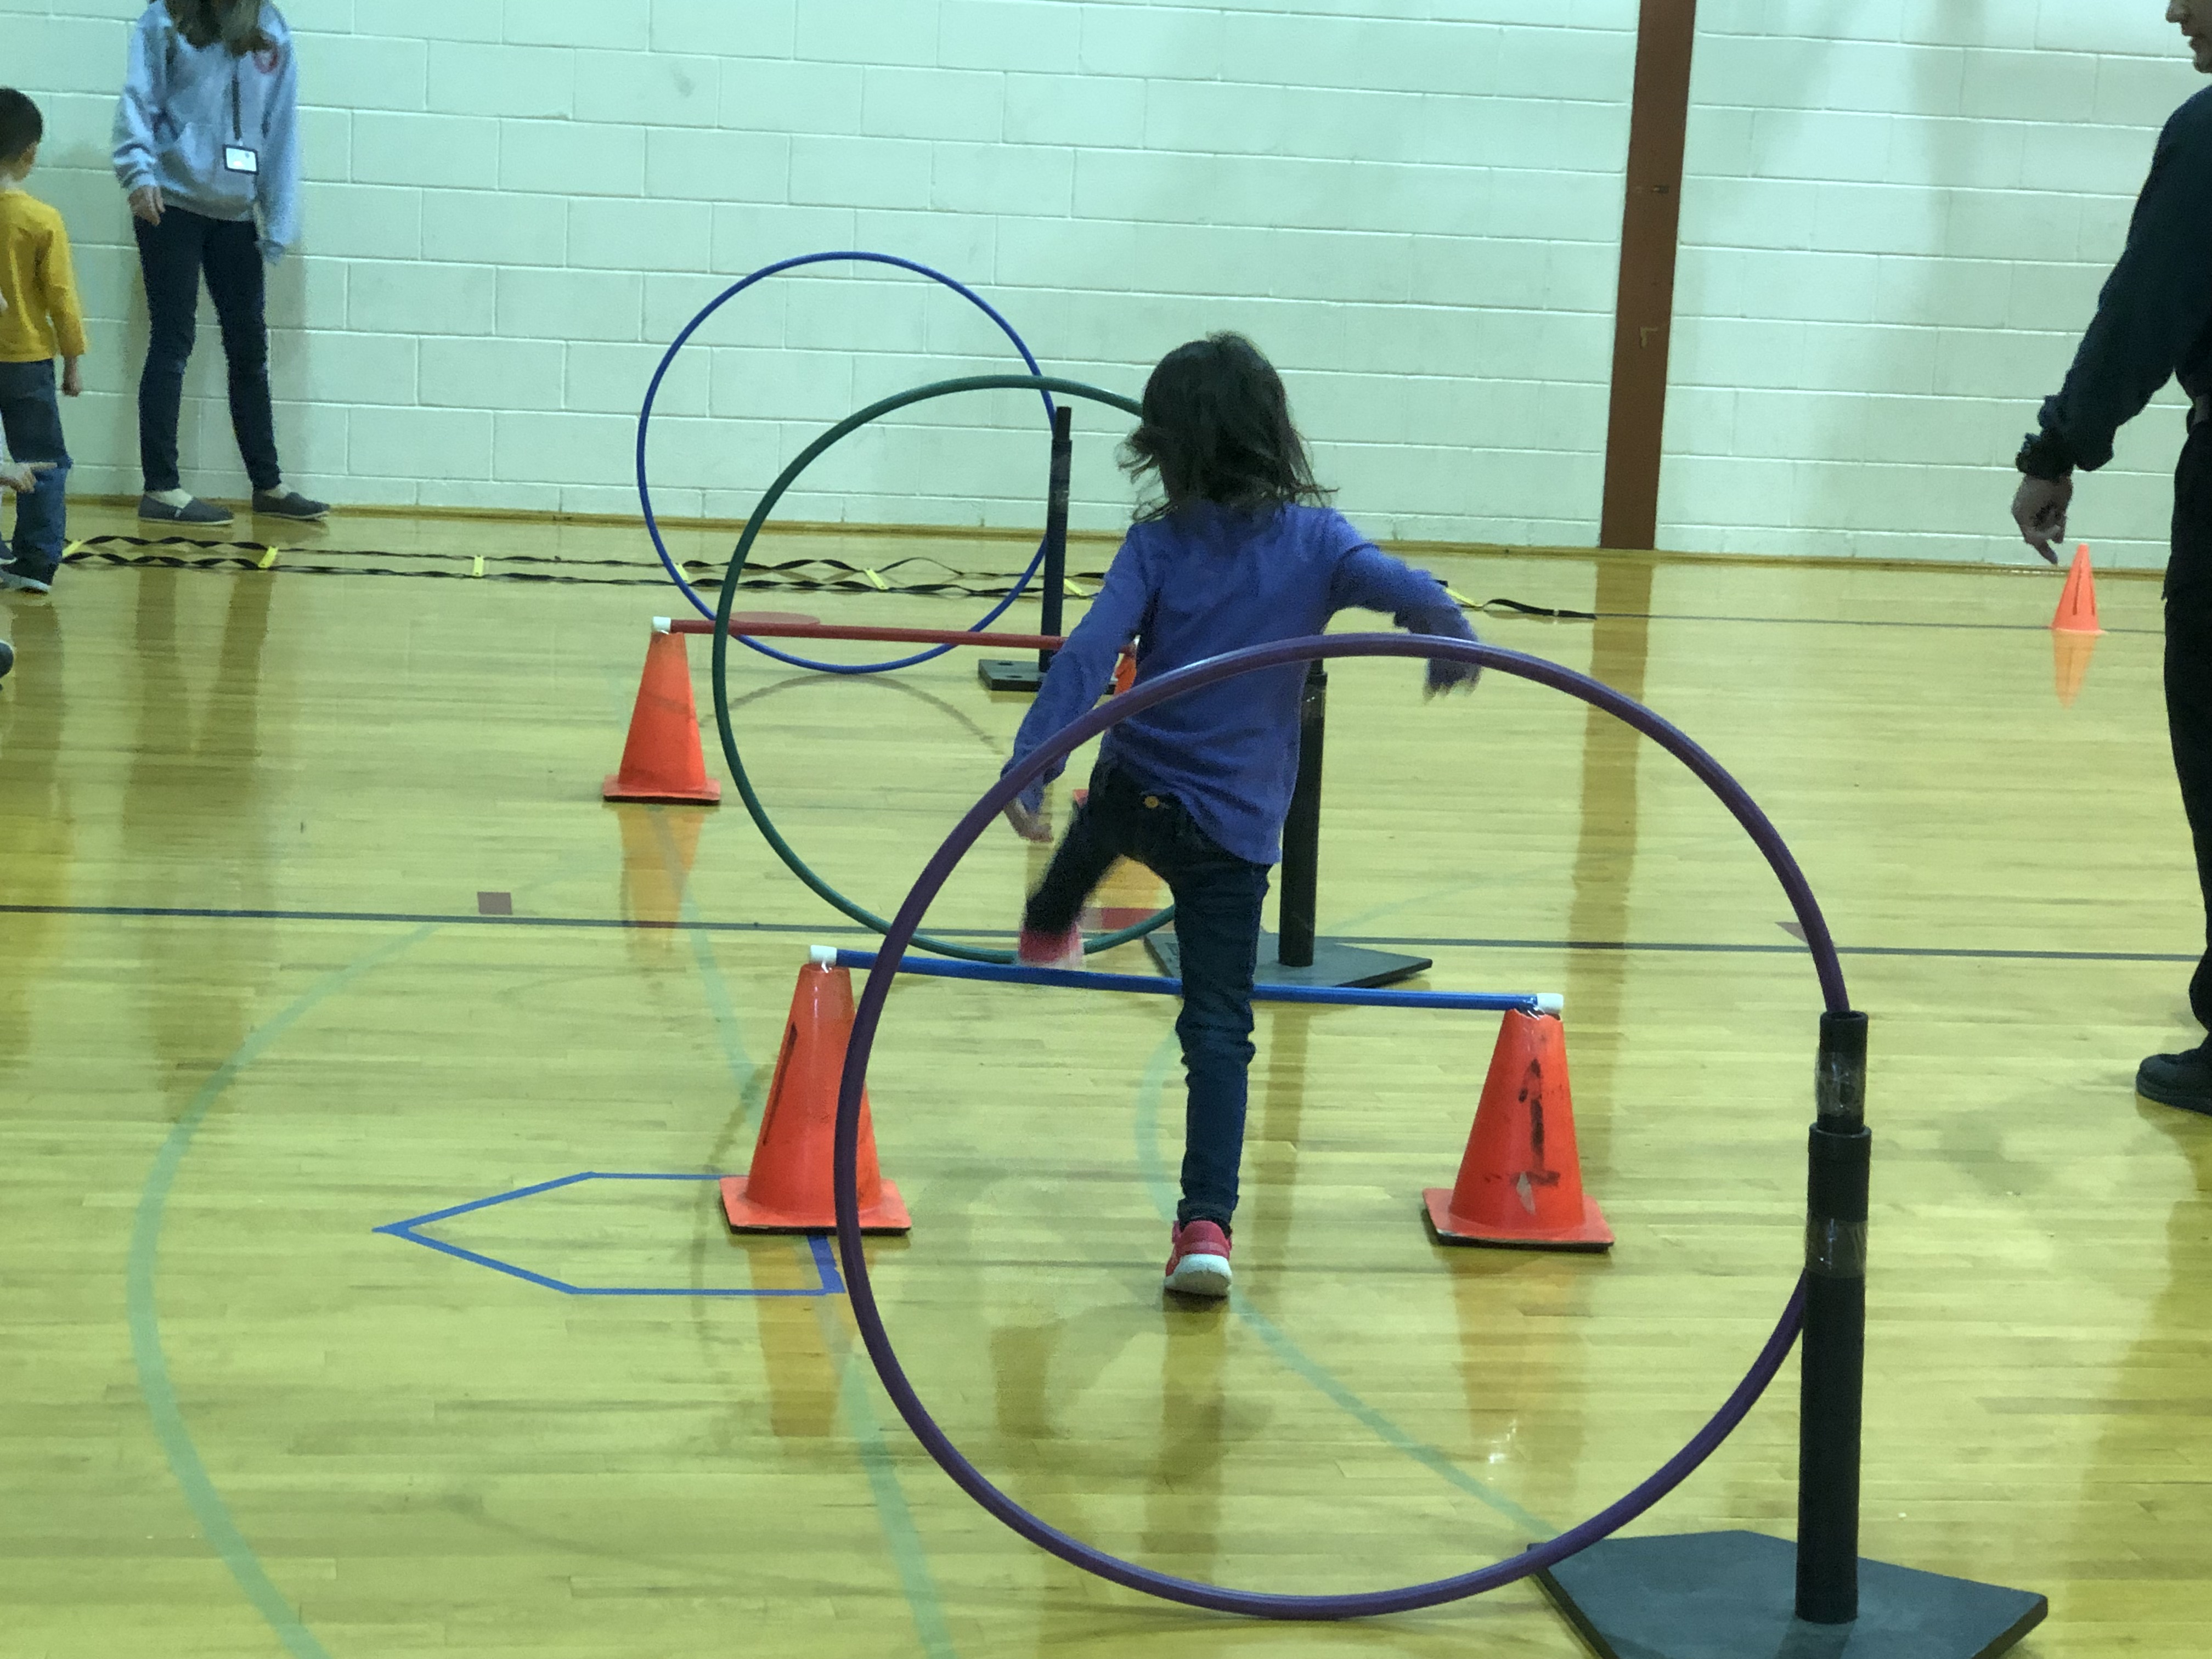 A student completes an obstacle course